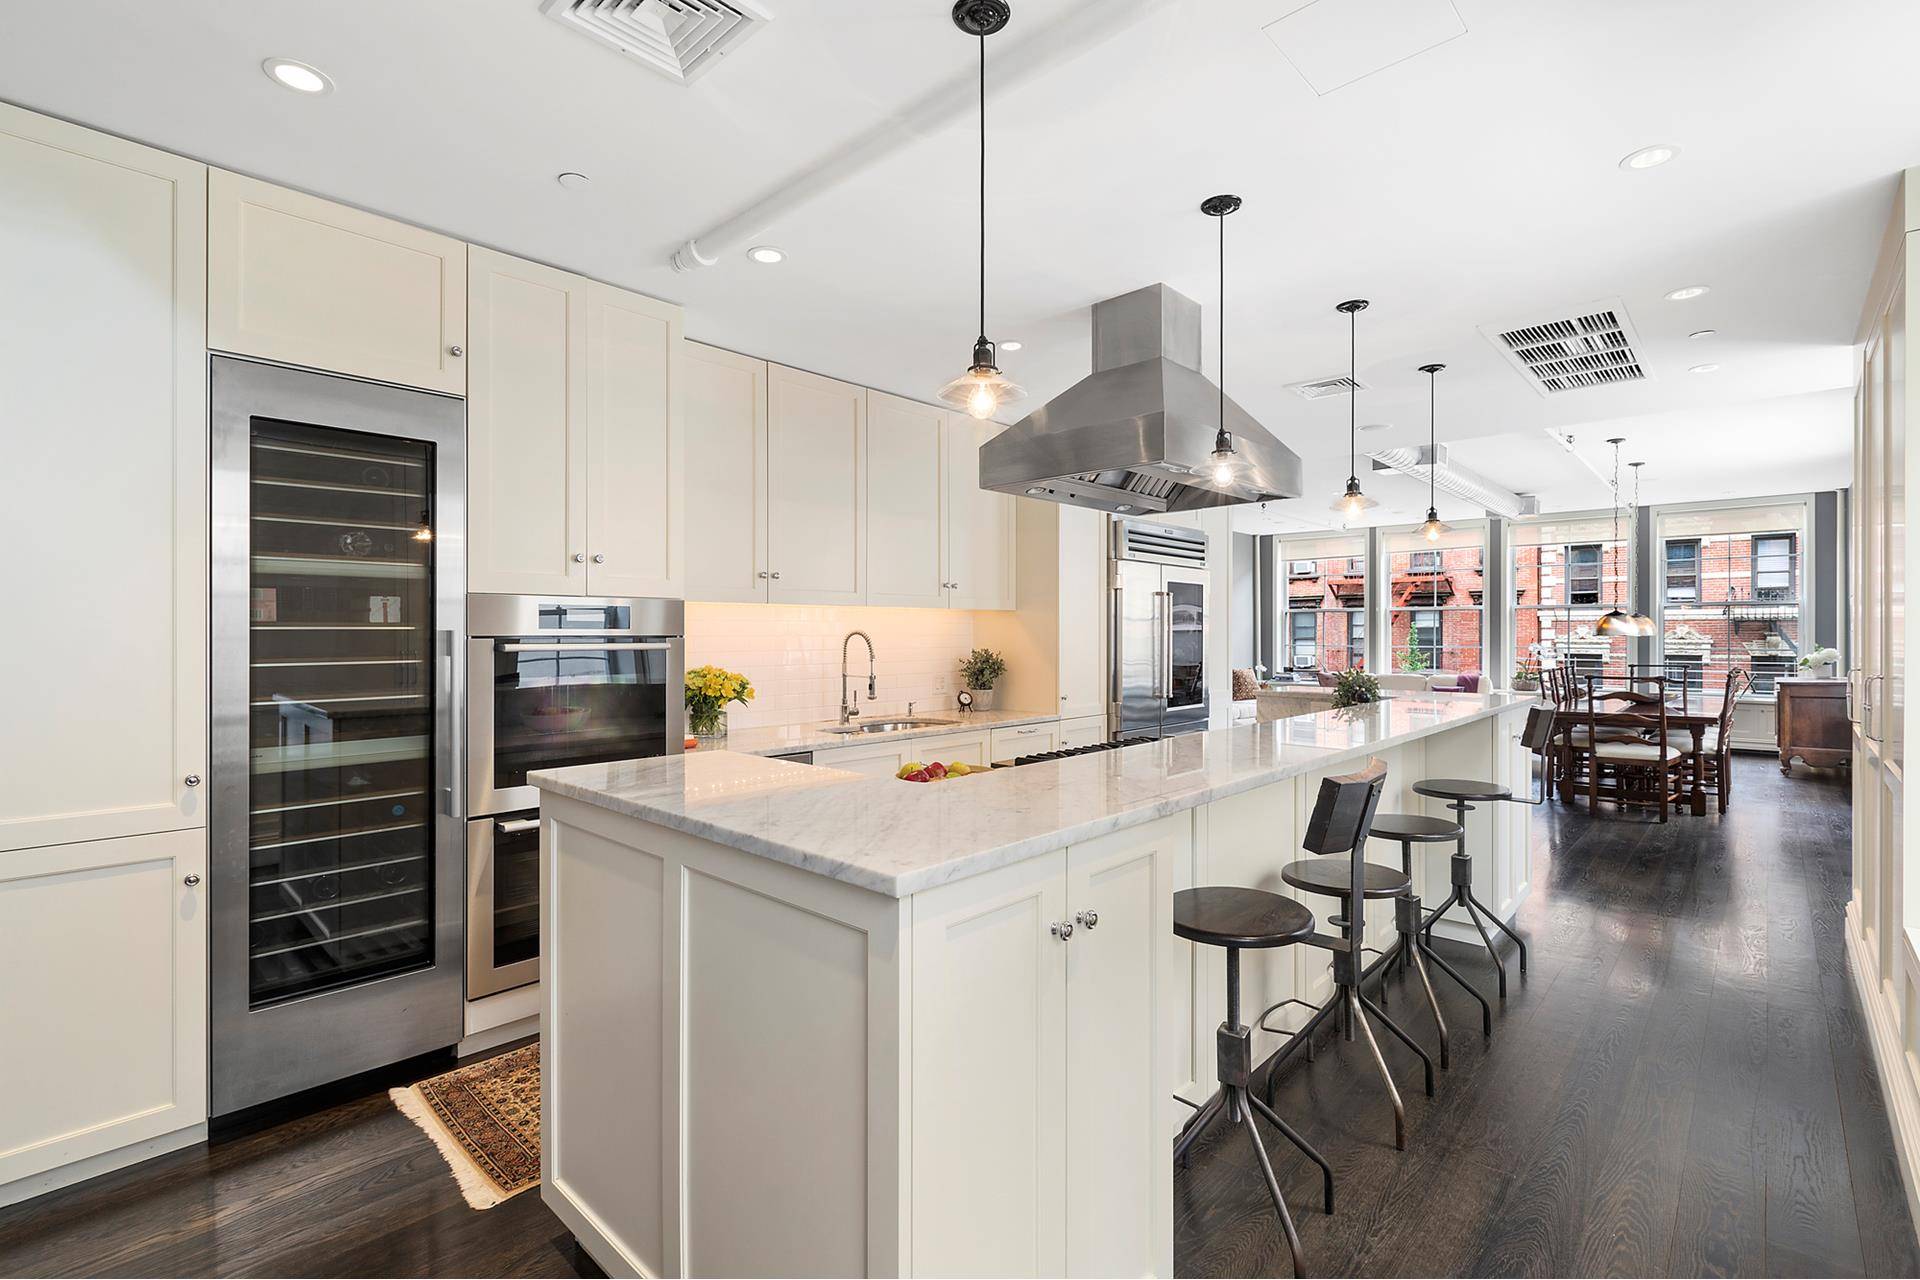 Truly spectacular duplex loft in the heart of historic SoHo has five bedrooms, two large windowed offices, home gym, four full baths, one powder room, two laundry rooms and large ...